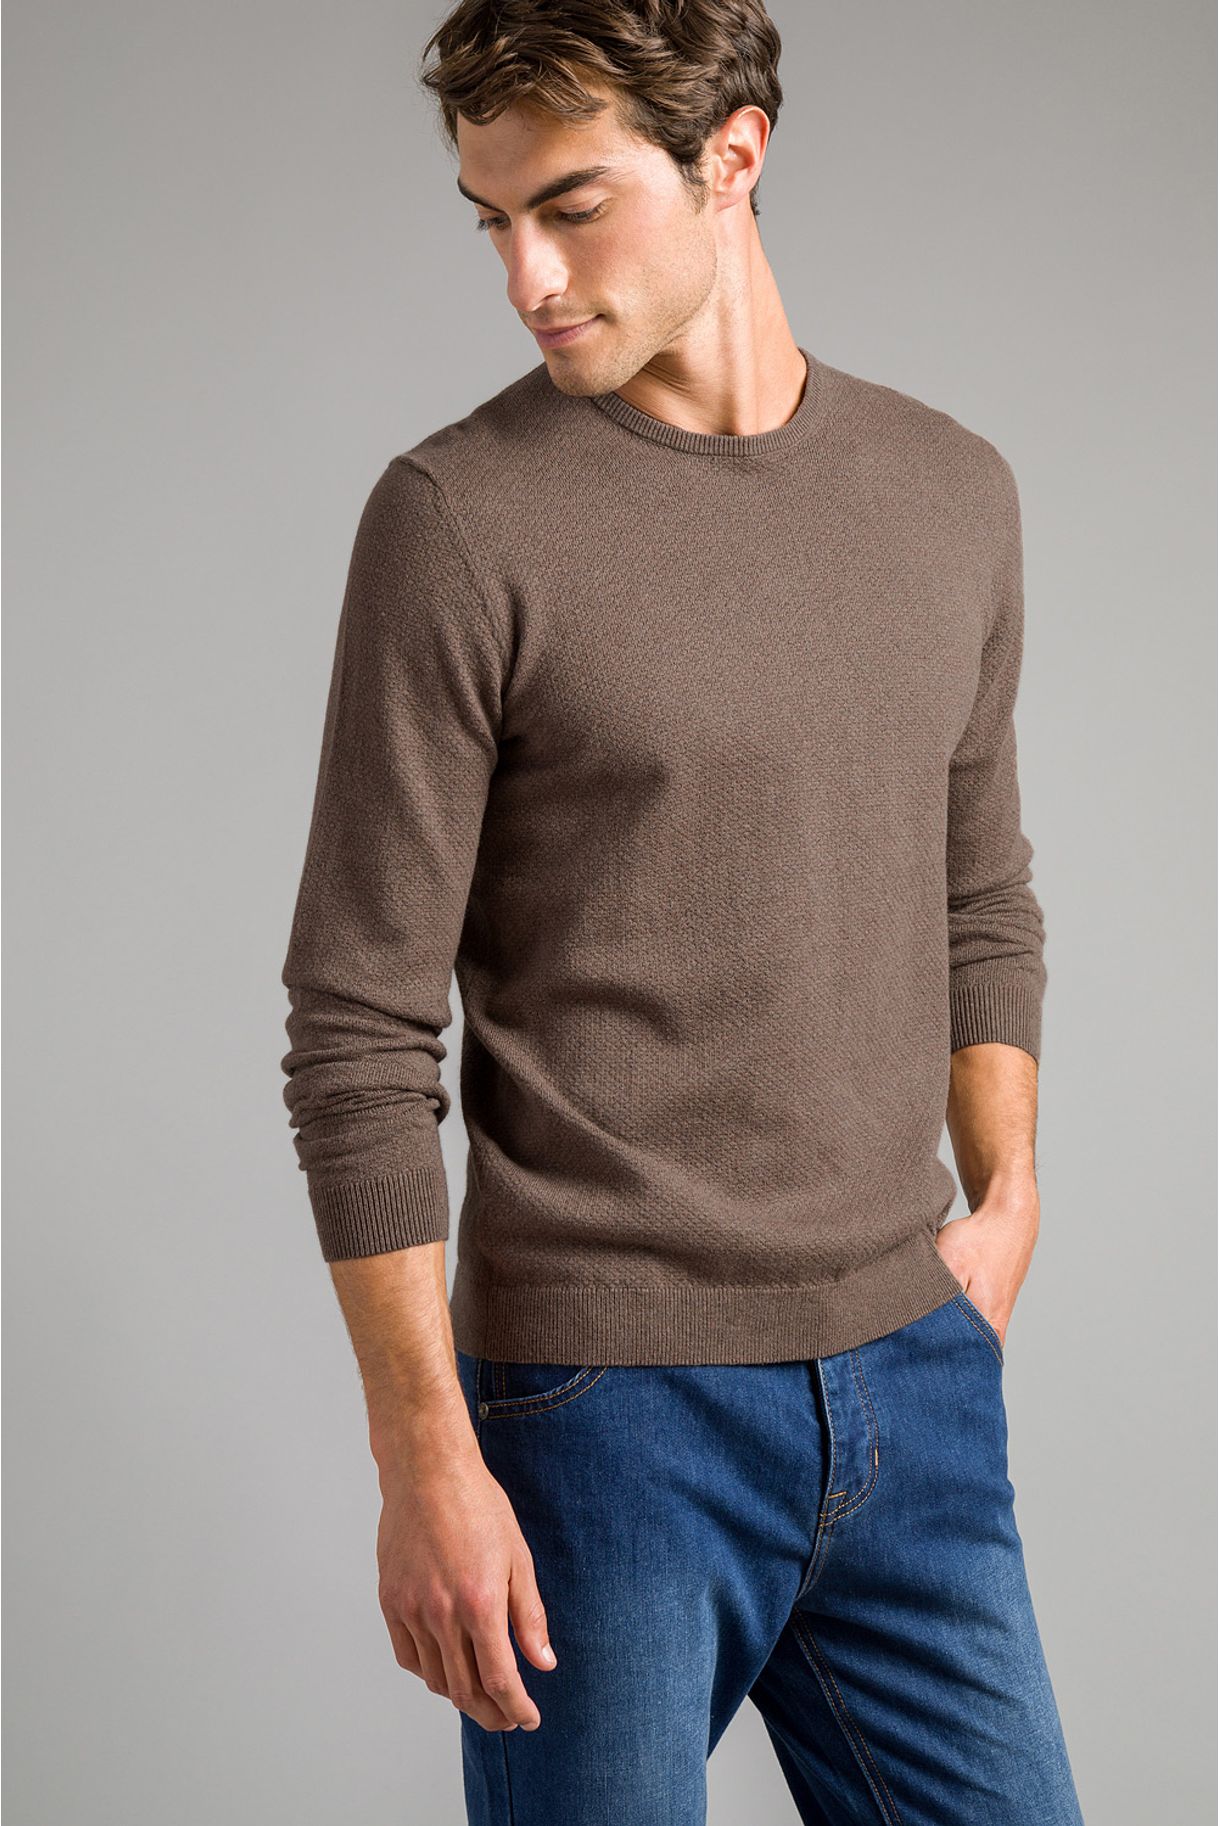 Men's Sweater w/ Structure 95/5